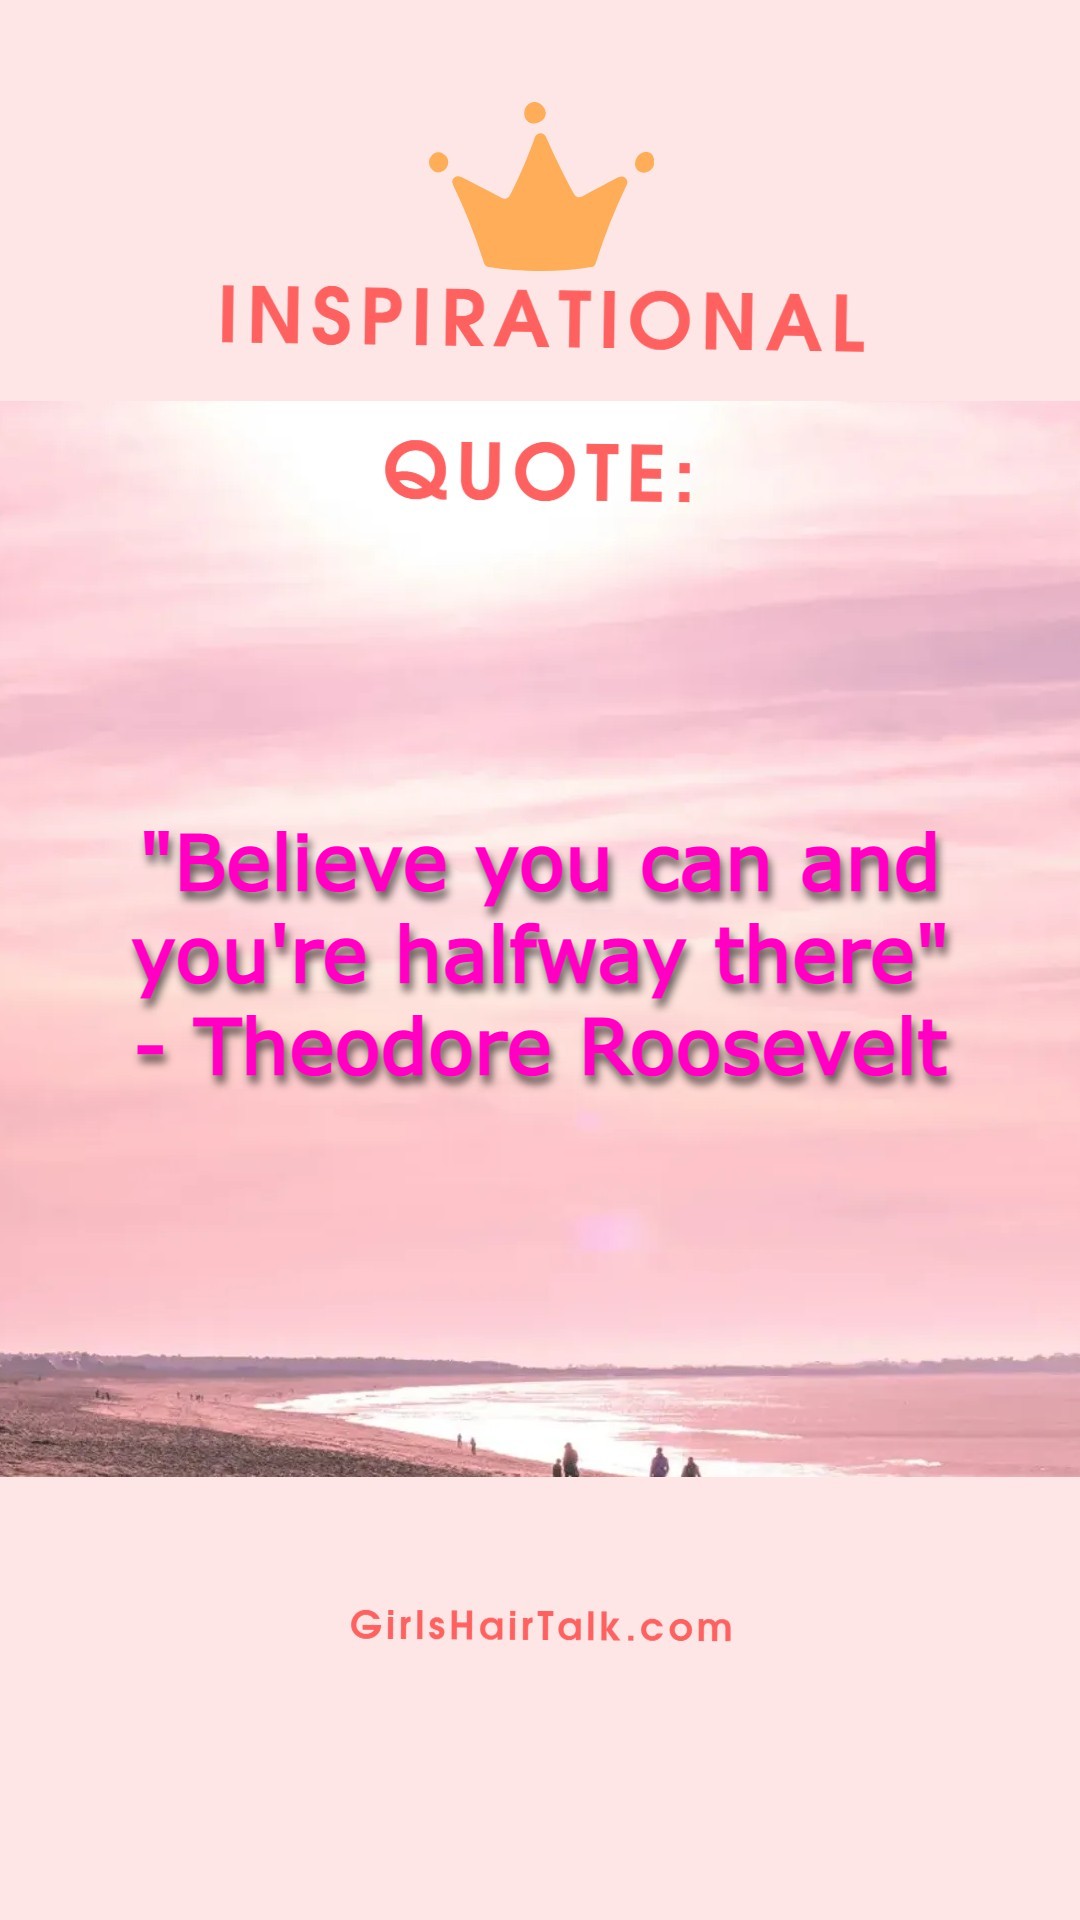 Theodore Roosevelt cancer quote